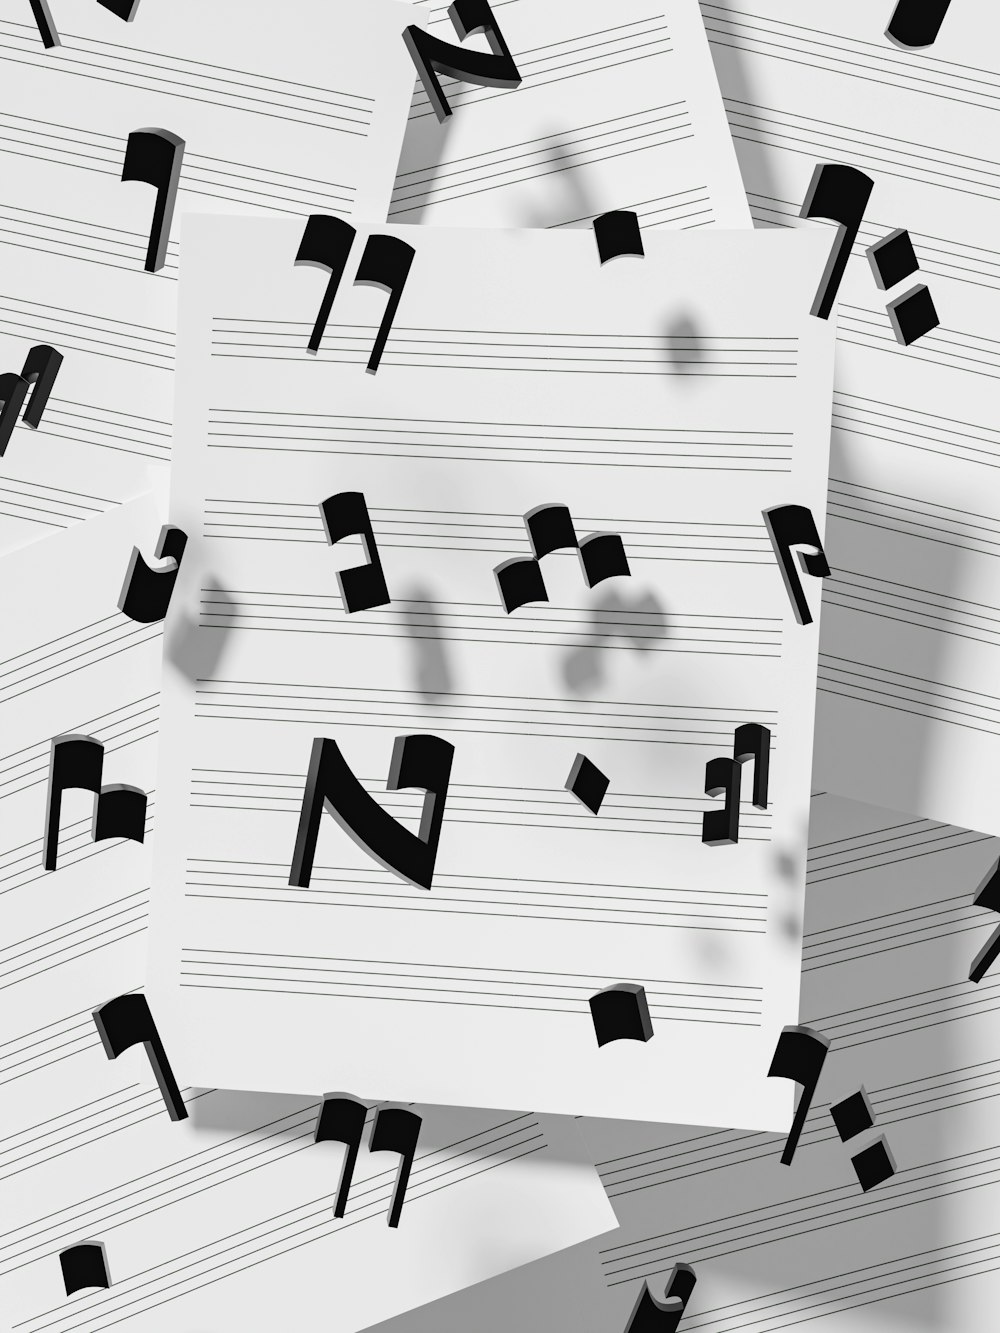 a pile of sheet music paper with musical notes